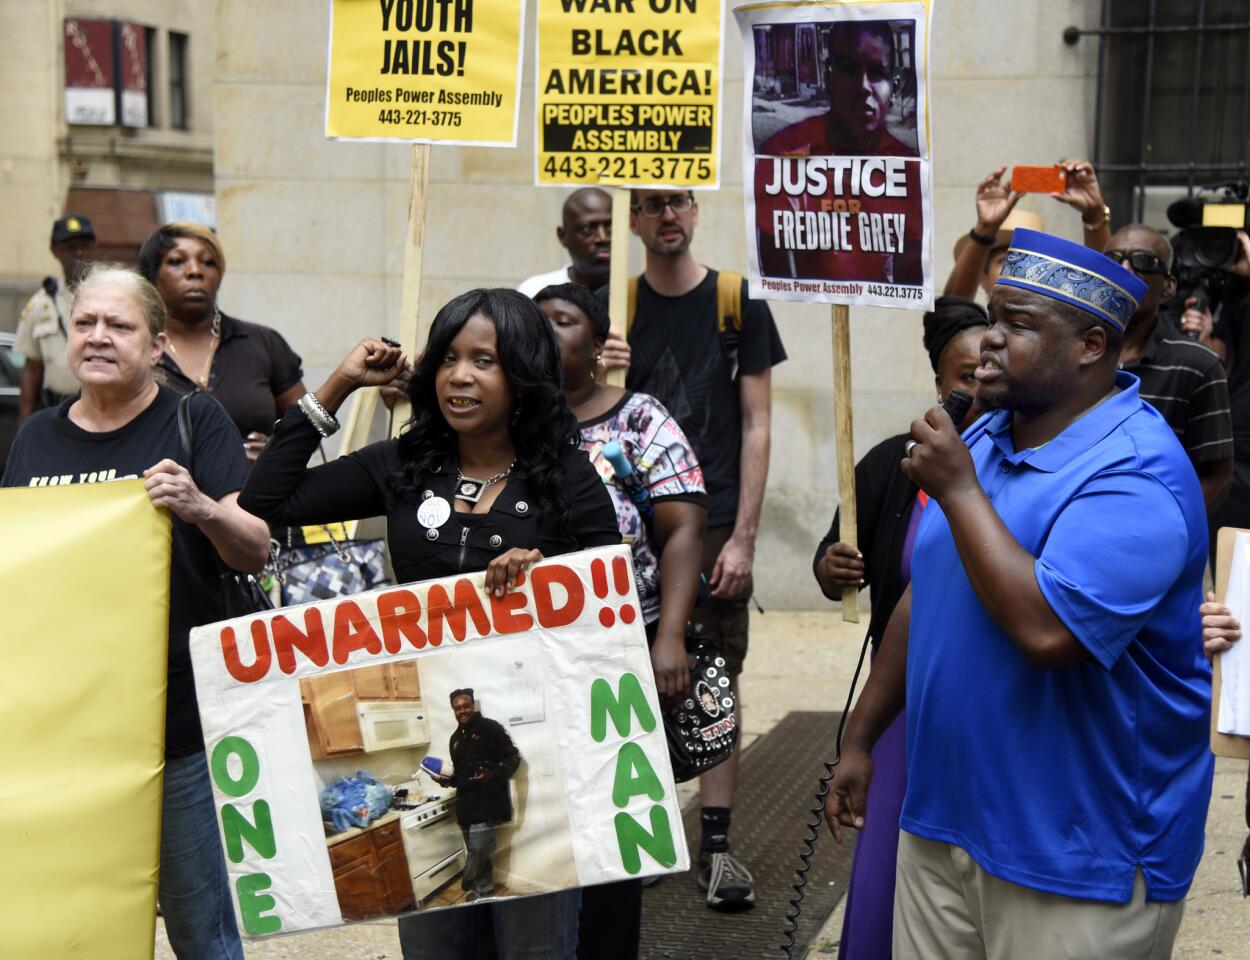 Freddie Gray protest and hearing